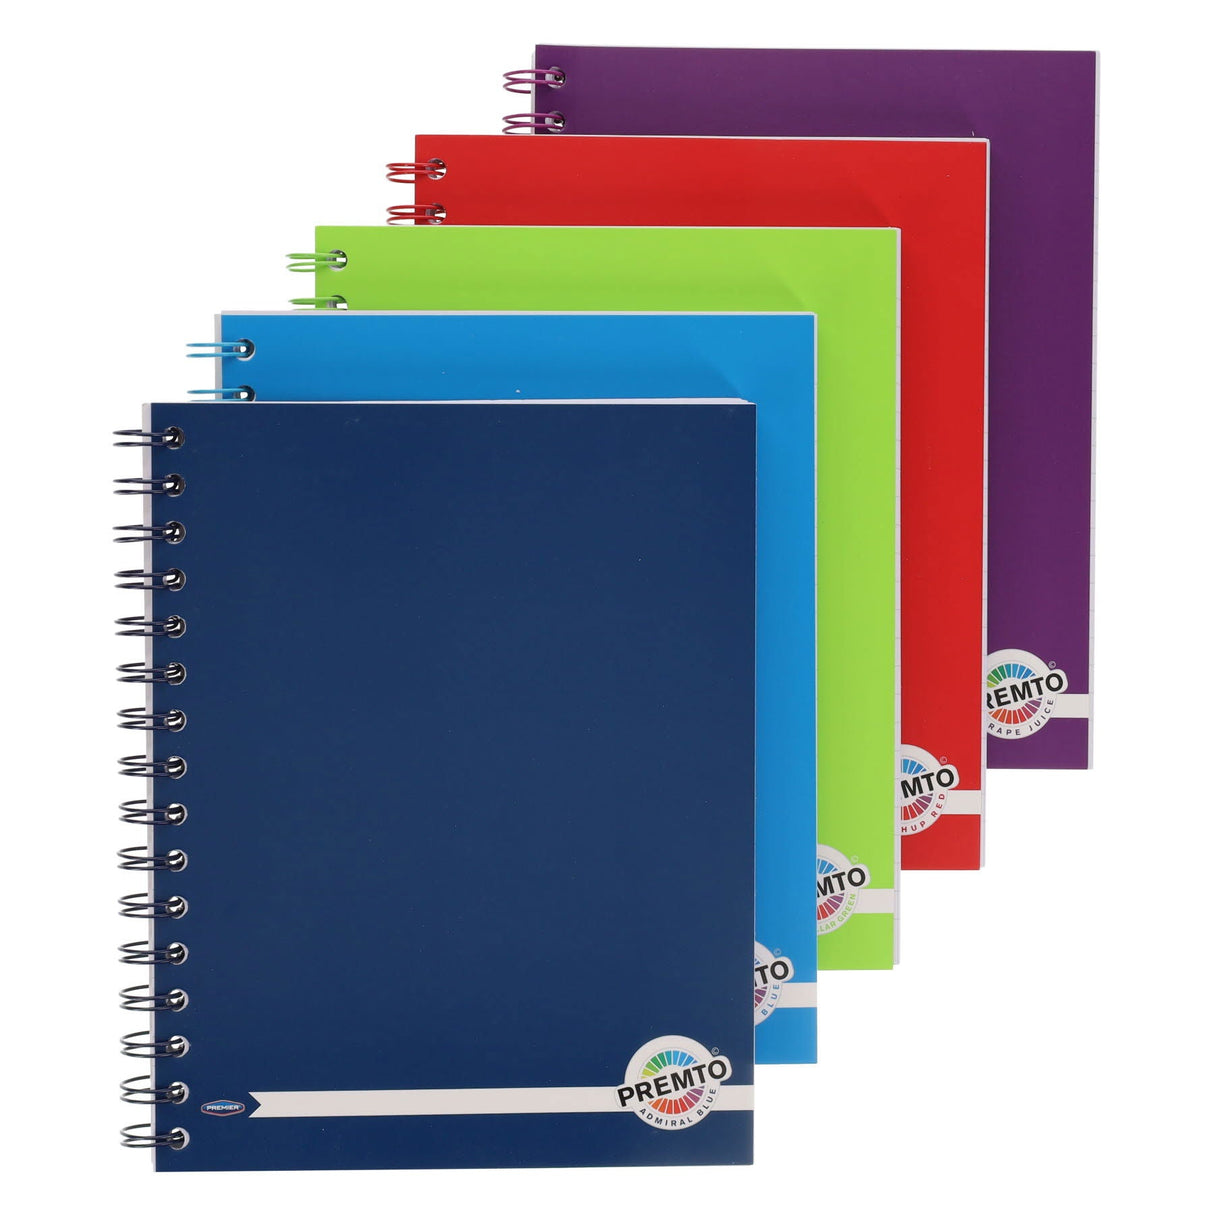 Premto A5 Wiro Notebook - 200 Pages - Admiral Blue-A5 Notebooks- Buy Online at Stationery Shop UK